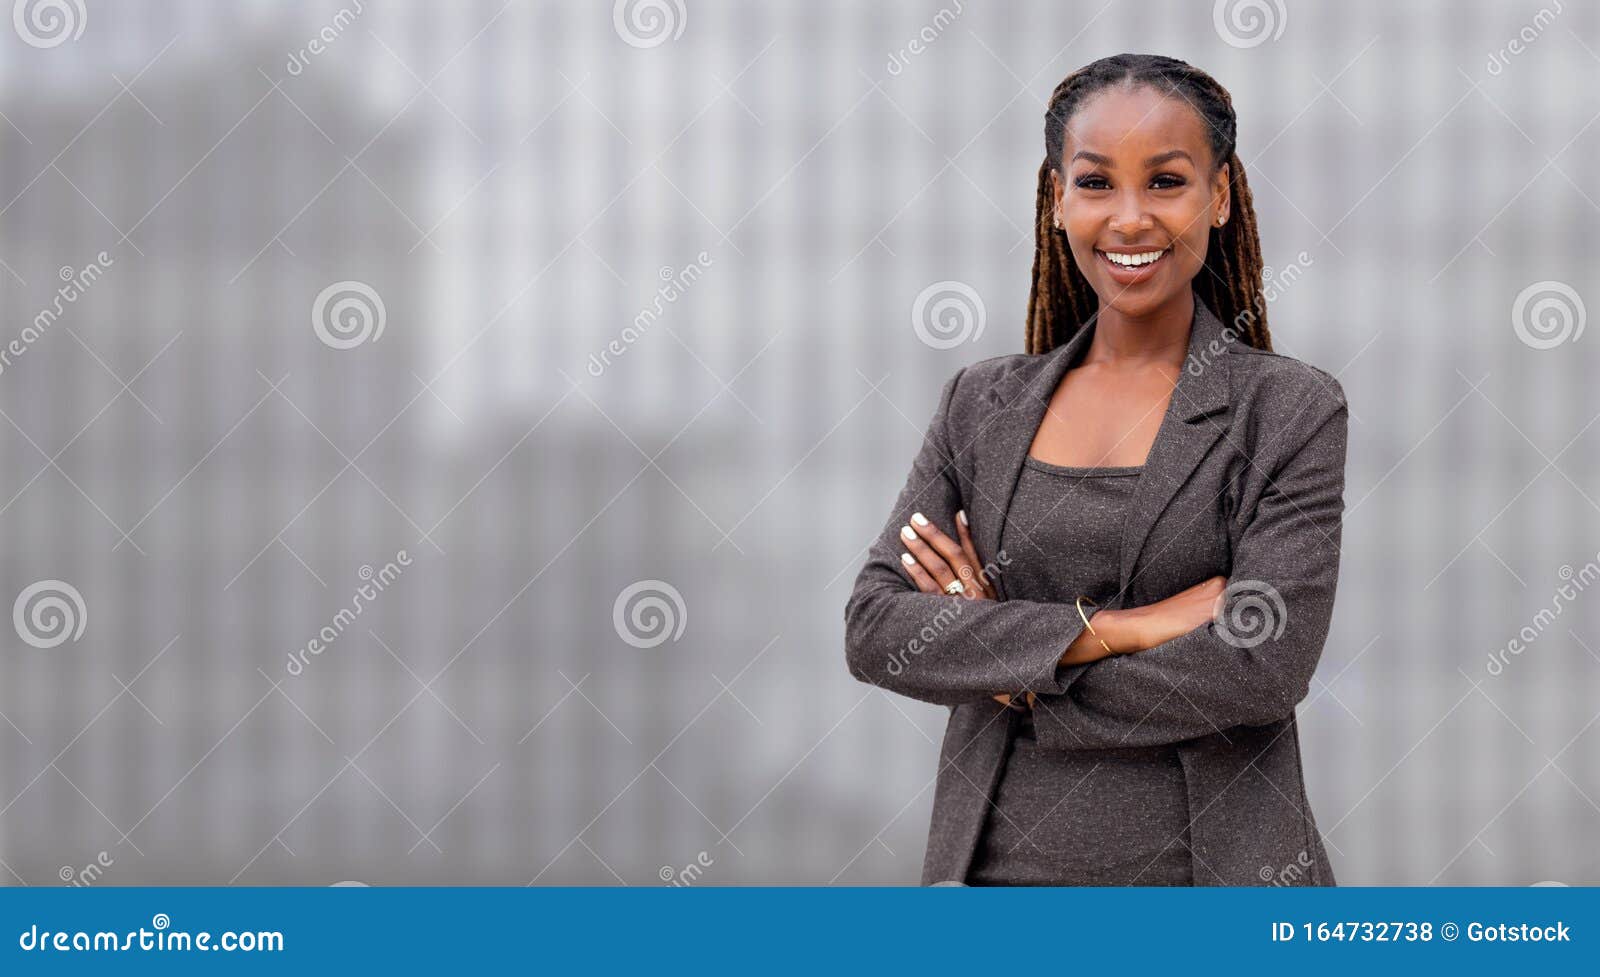 african american businesswoman architect, real estate sales person, in full wide banner